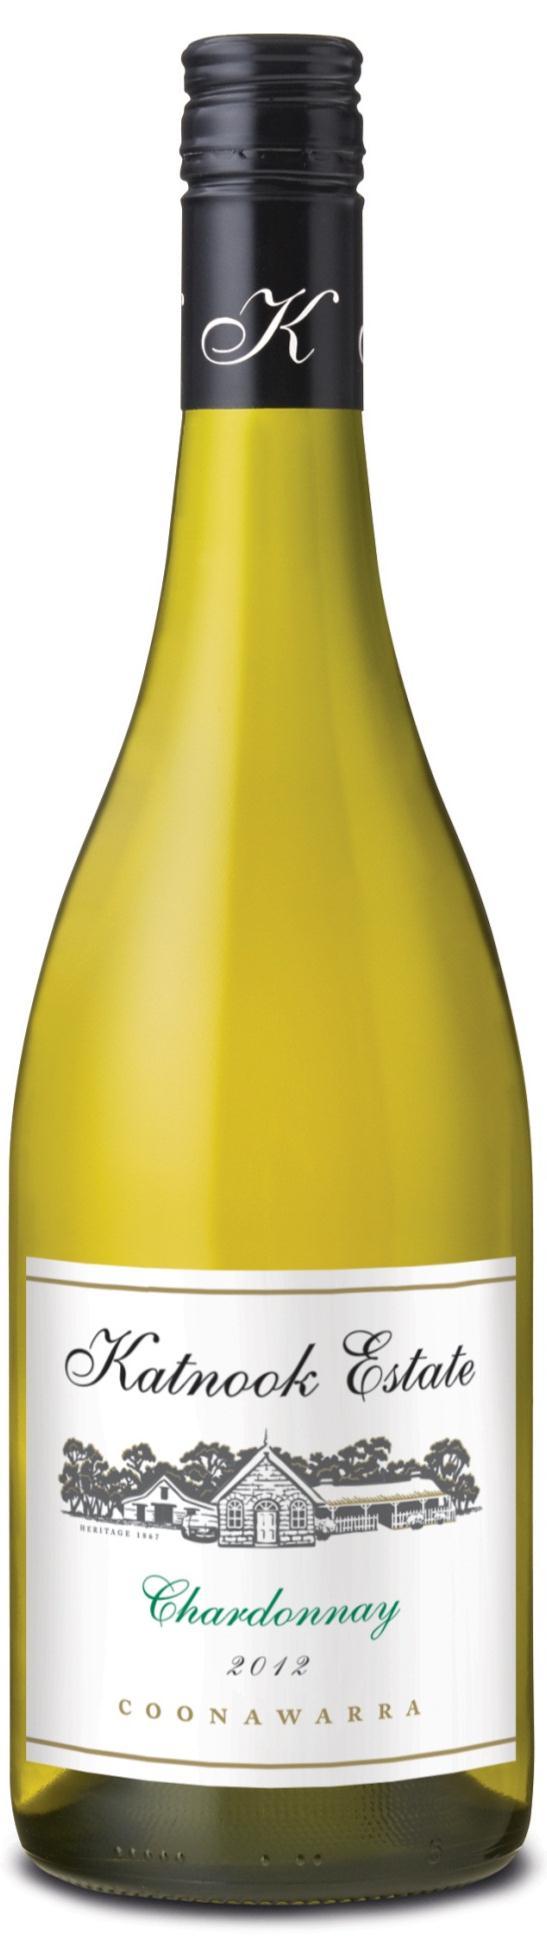 Chardonnay 2012 The Katnook Estate range of premium quality, single varietal wines are an expression of the classic and unique characteristics of the Coonawarra wine region.